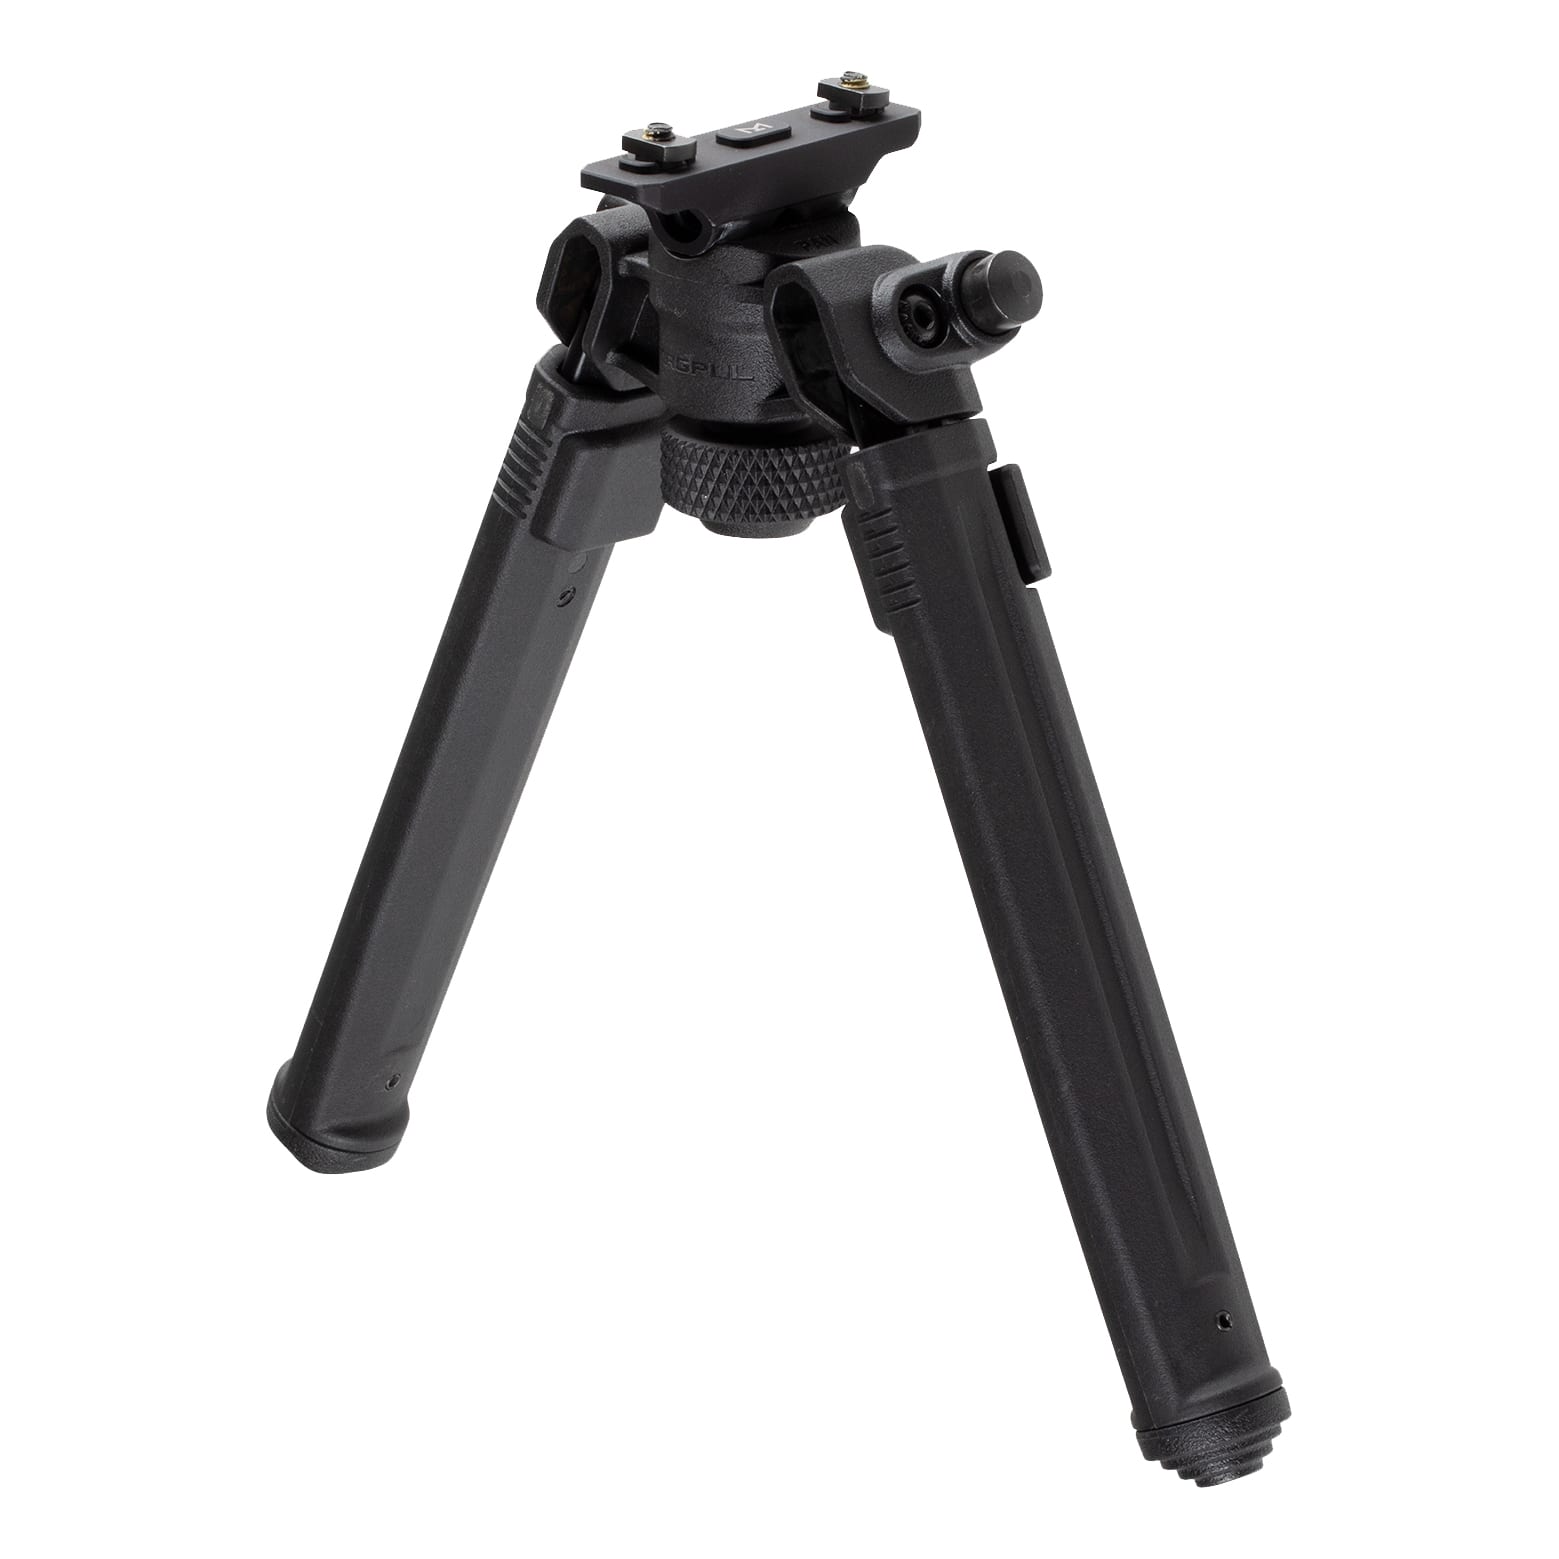 Tactical Firearm Accessories: Picatinny Rails, Shell Holders